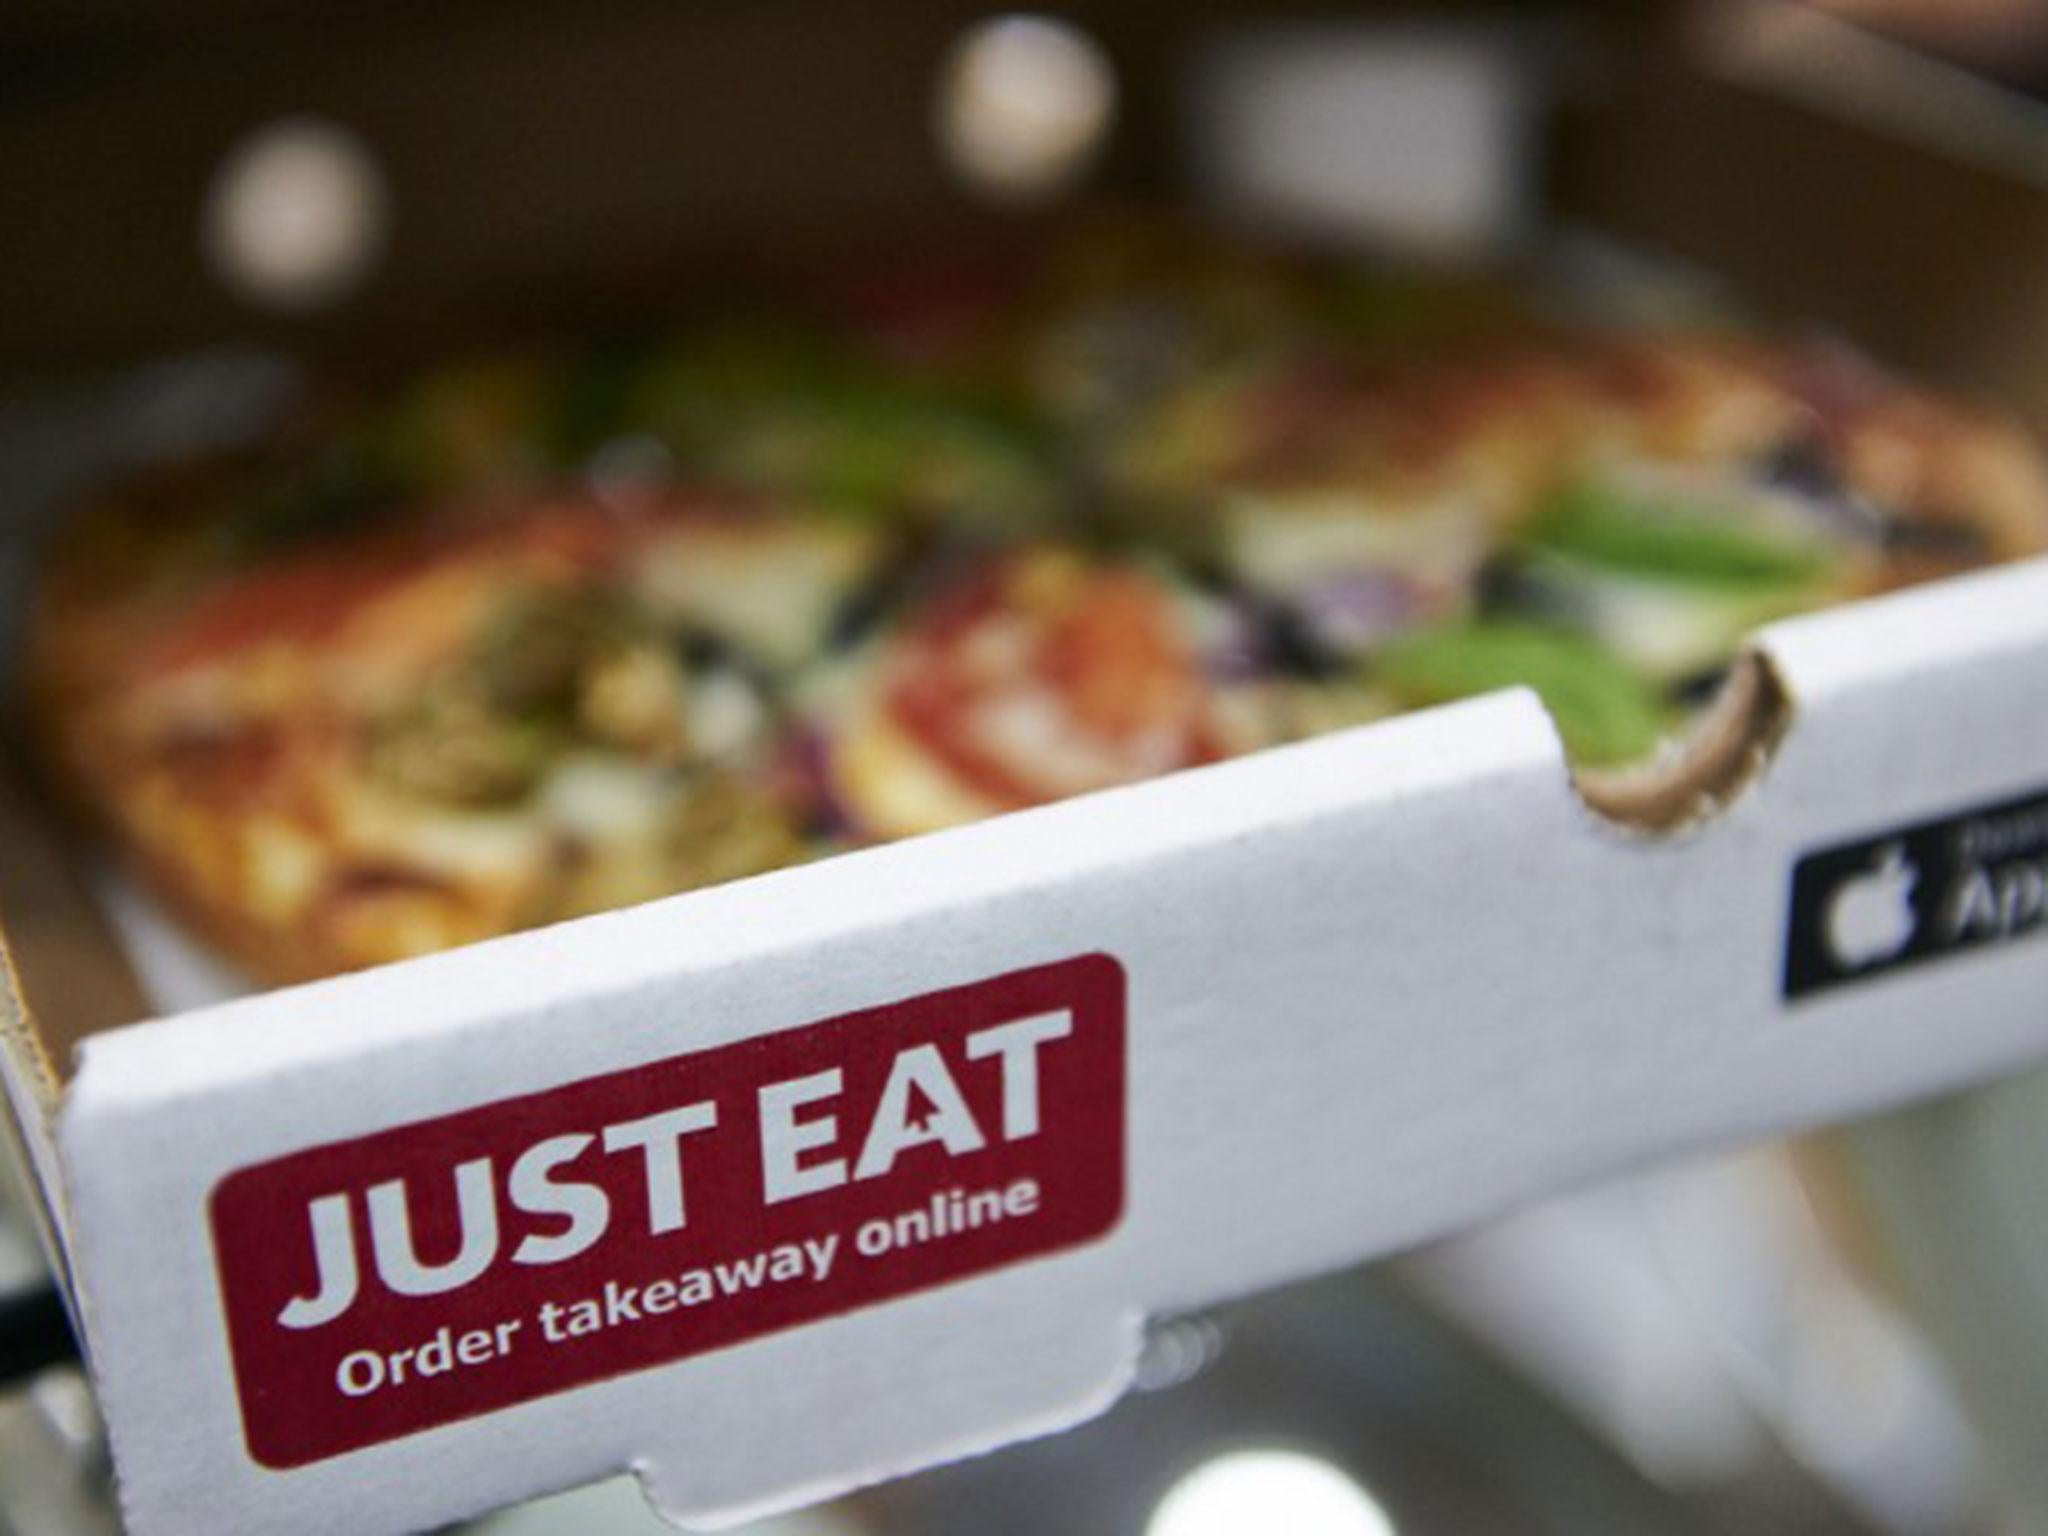 Just Eat's orders are growing fast